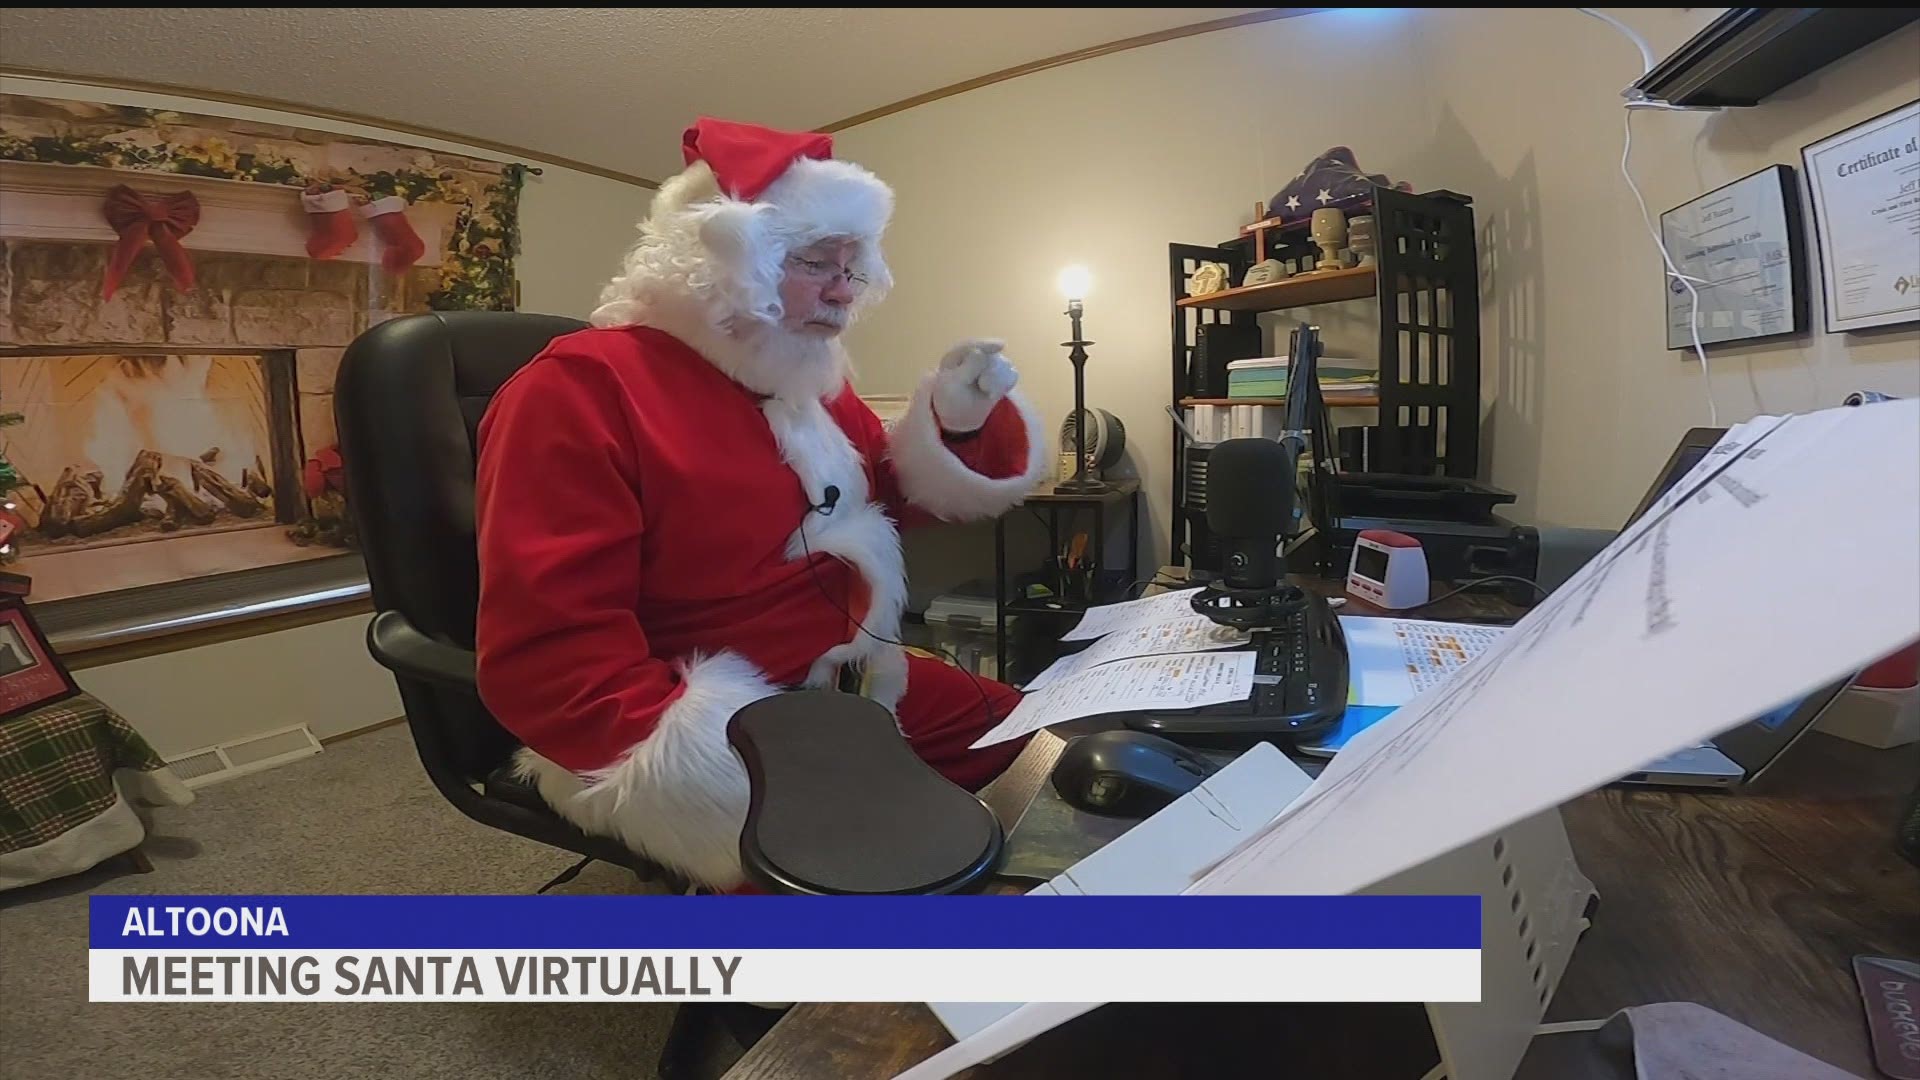 A retired pastor's virtual Santa visits brings smiles to kids' faces and benefits a local charity.